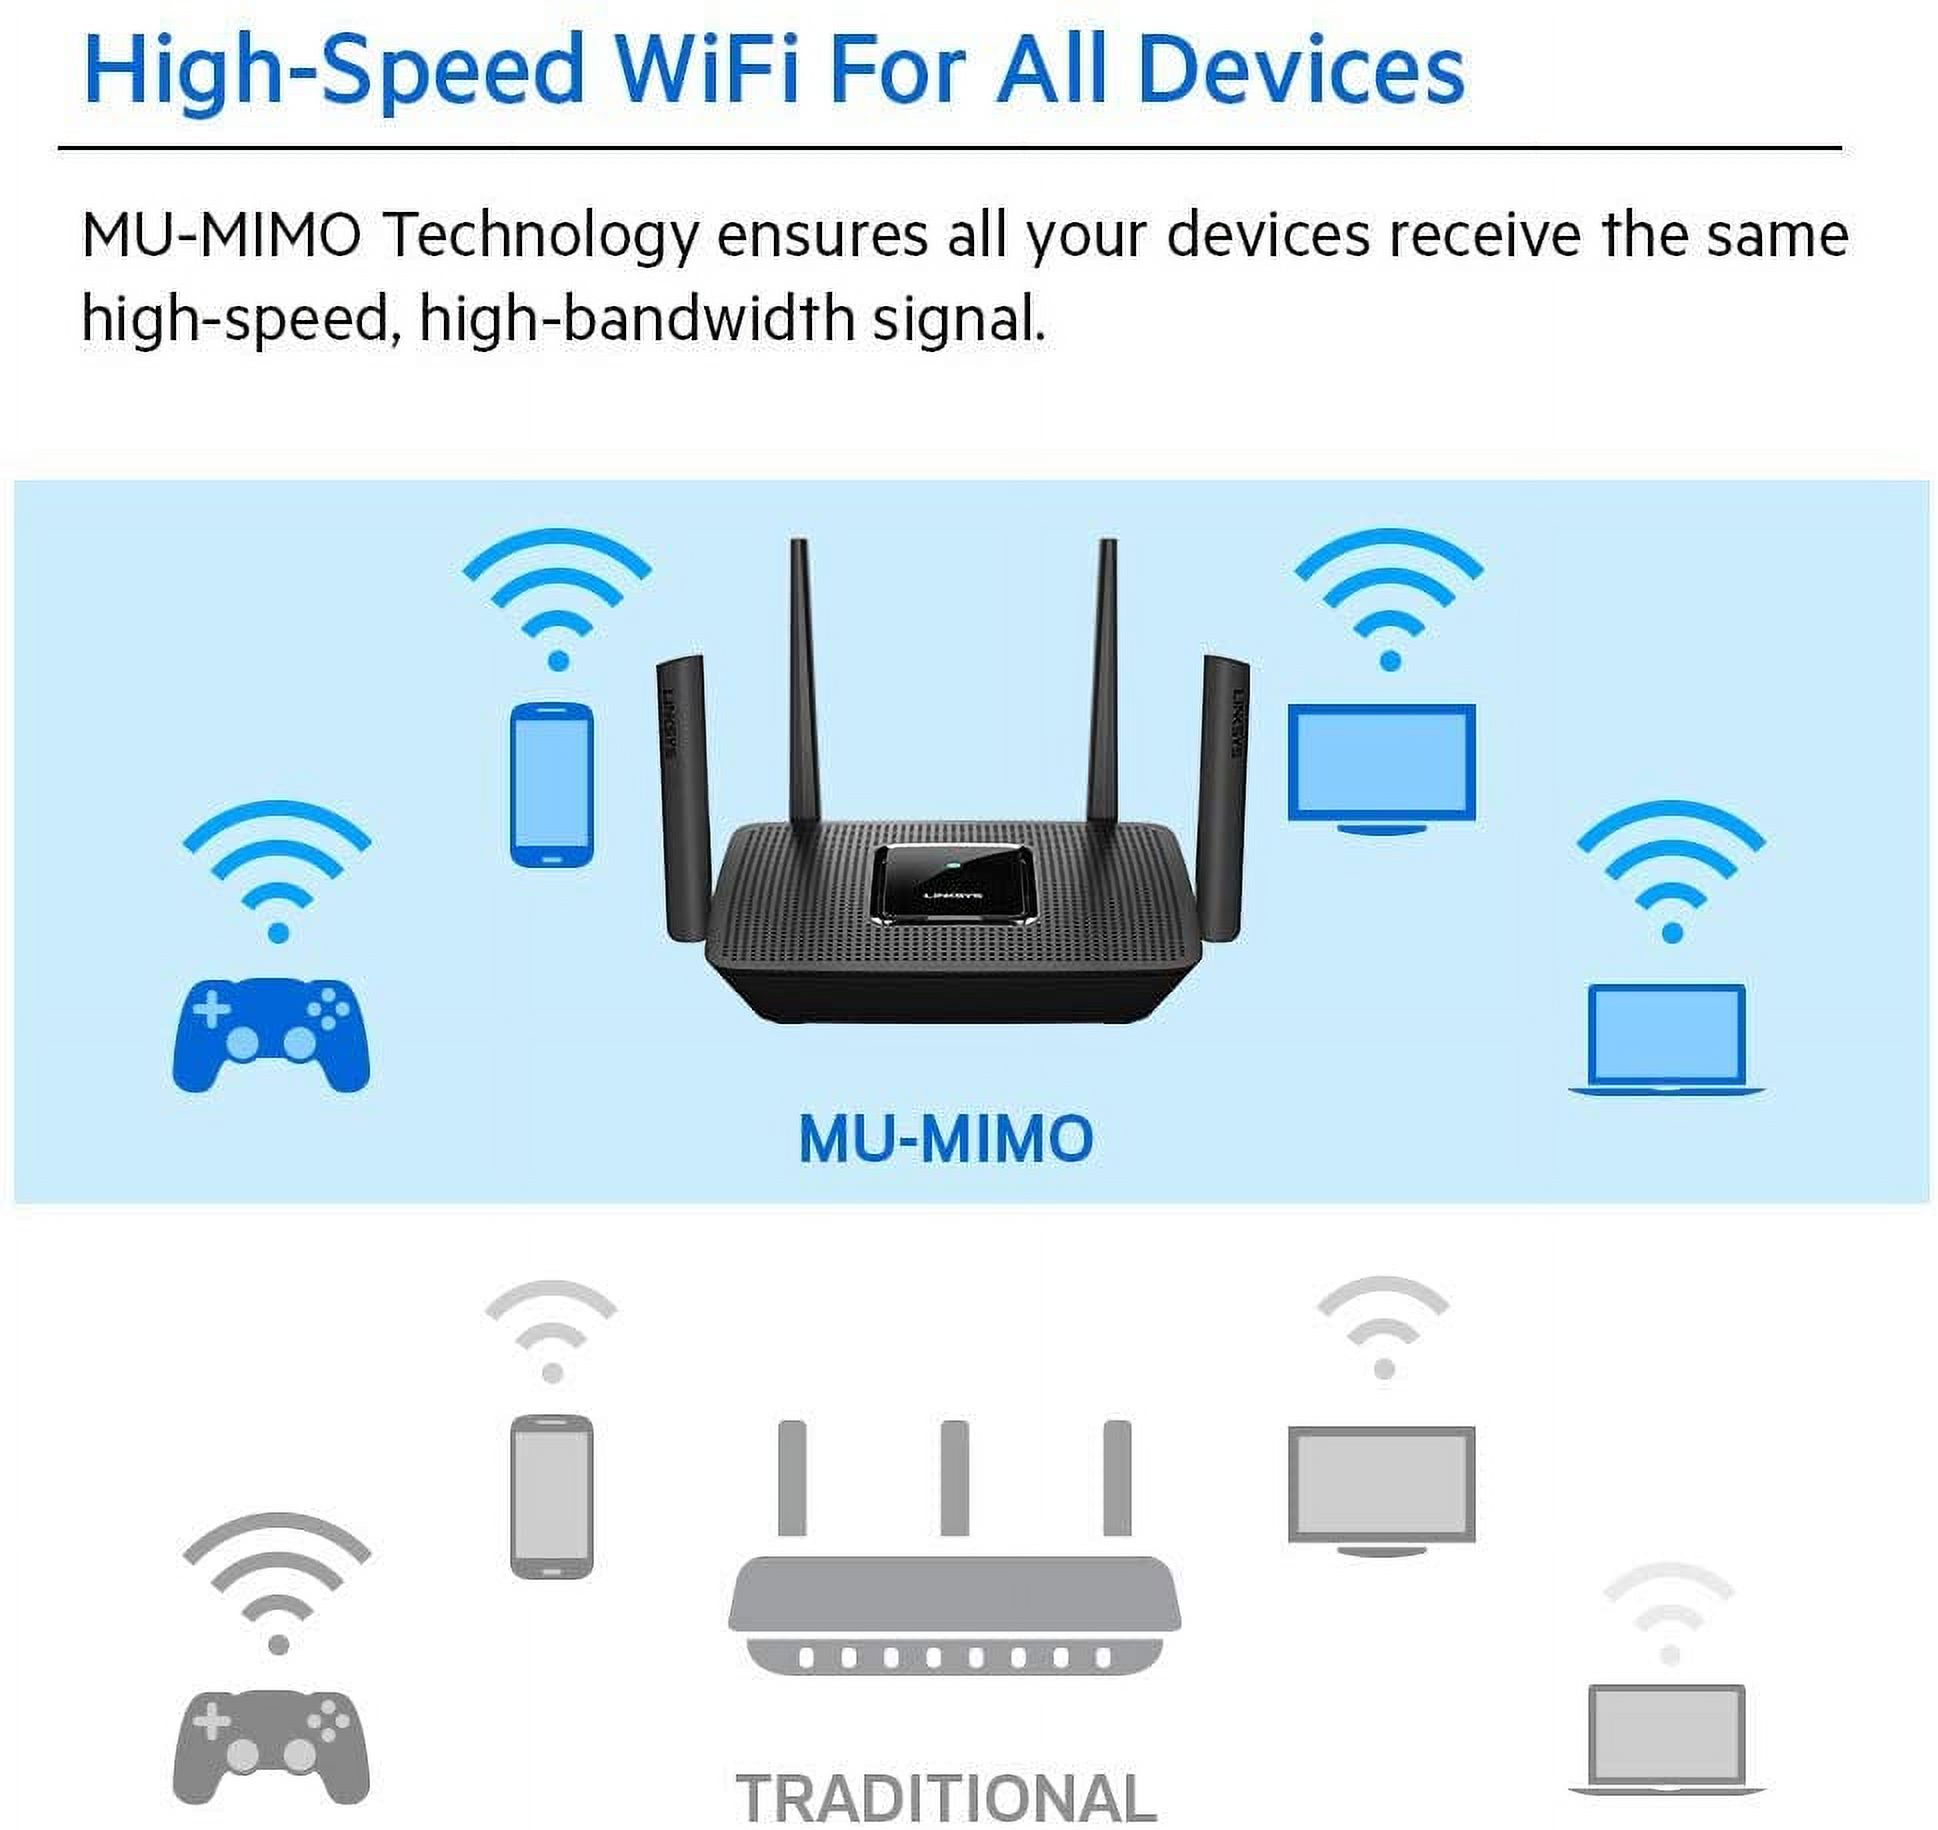 Restored Linksys MR9000 Mesh Wi-Fi Router (Tri-Band Router, Wireless Mesh Router for Home AC3000), Future-Proof MU-Mimo Fast Wireless Router (Refurbished) - image 4 of 7